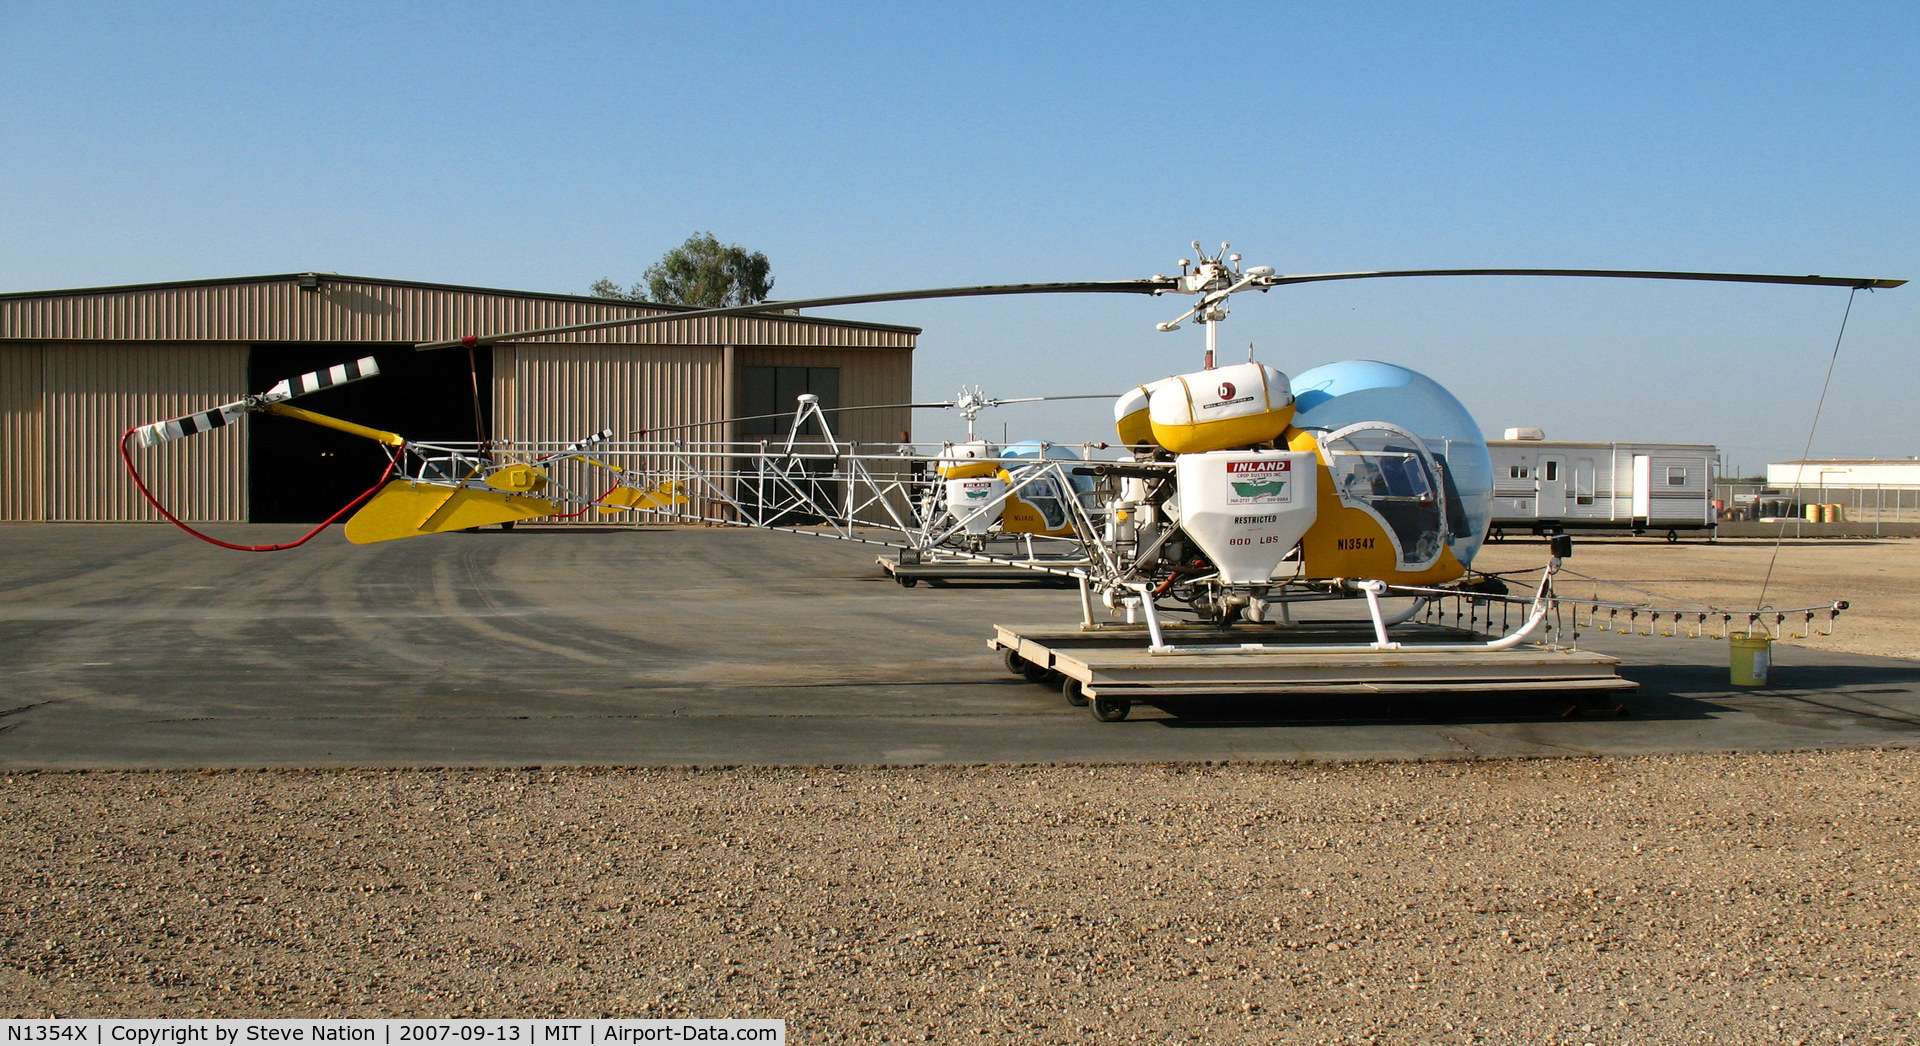 N1354X, 1966 Bell 47G-4A C/N 7537, Inland Cropdusters 1966 Bell 47G-4A sprayer @ Shafter, CA